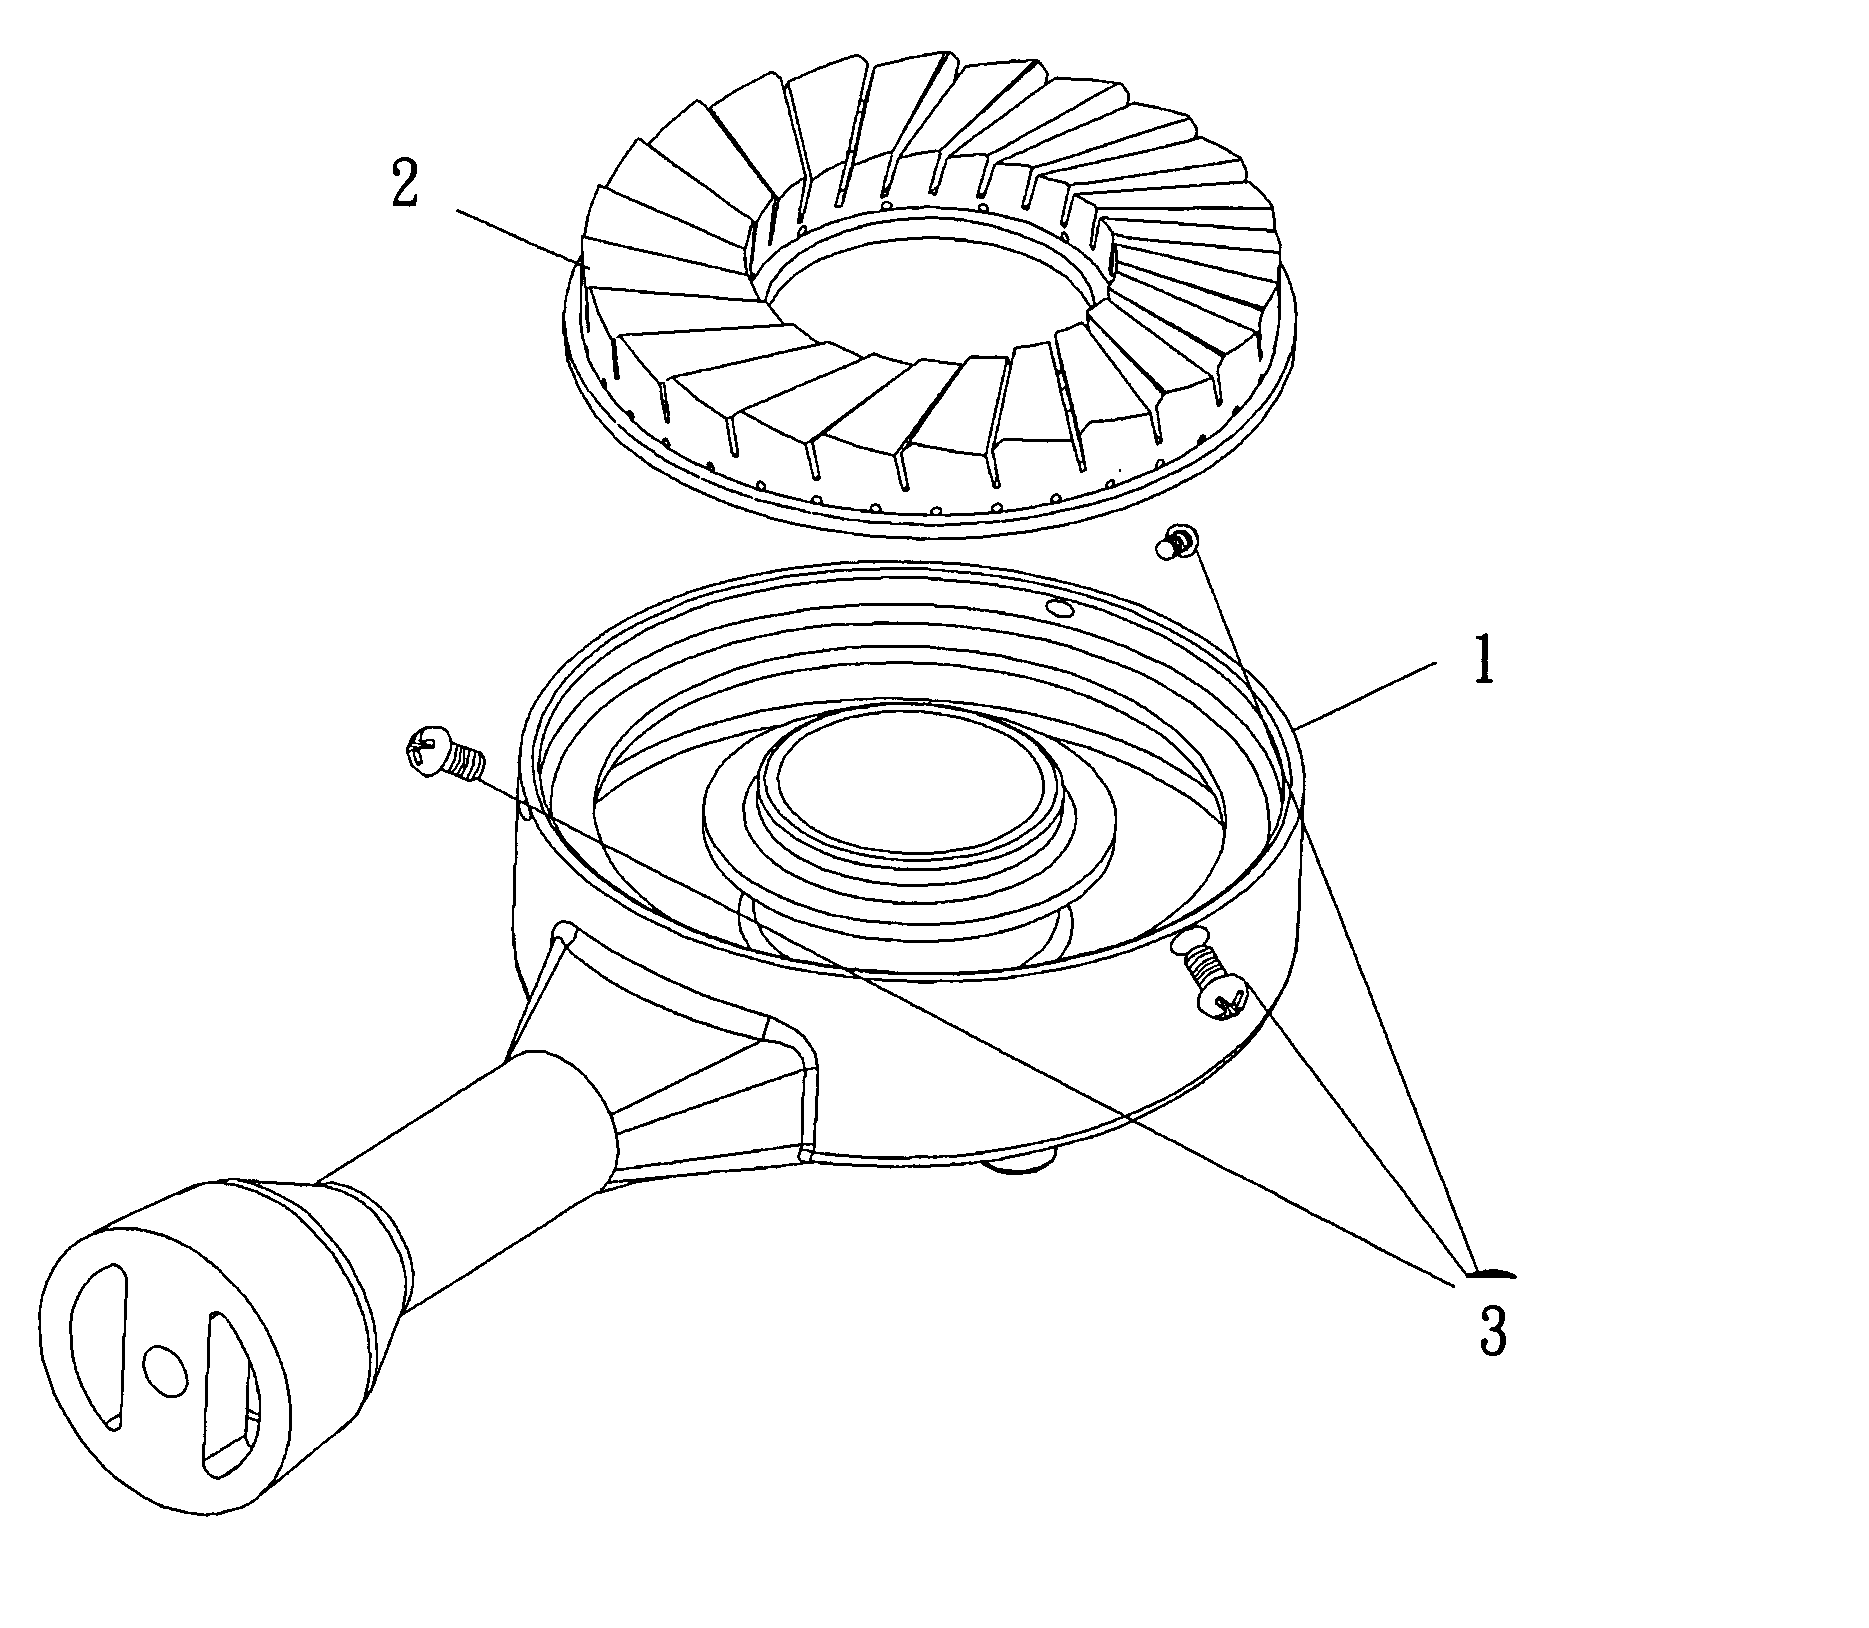 Burner head for a gas stove